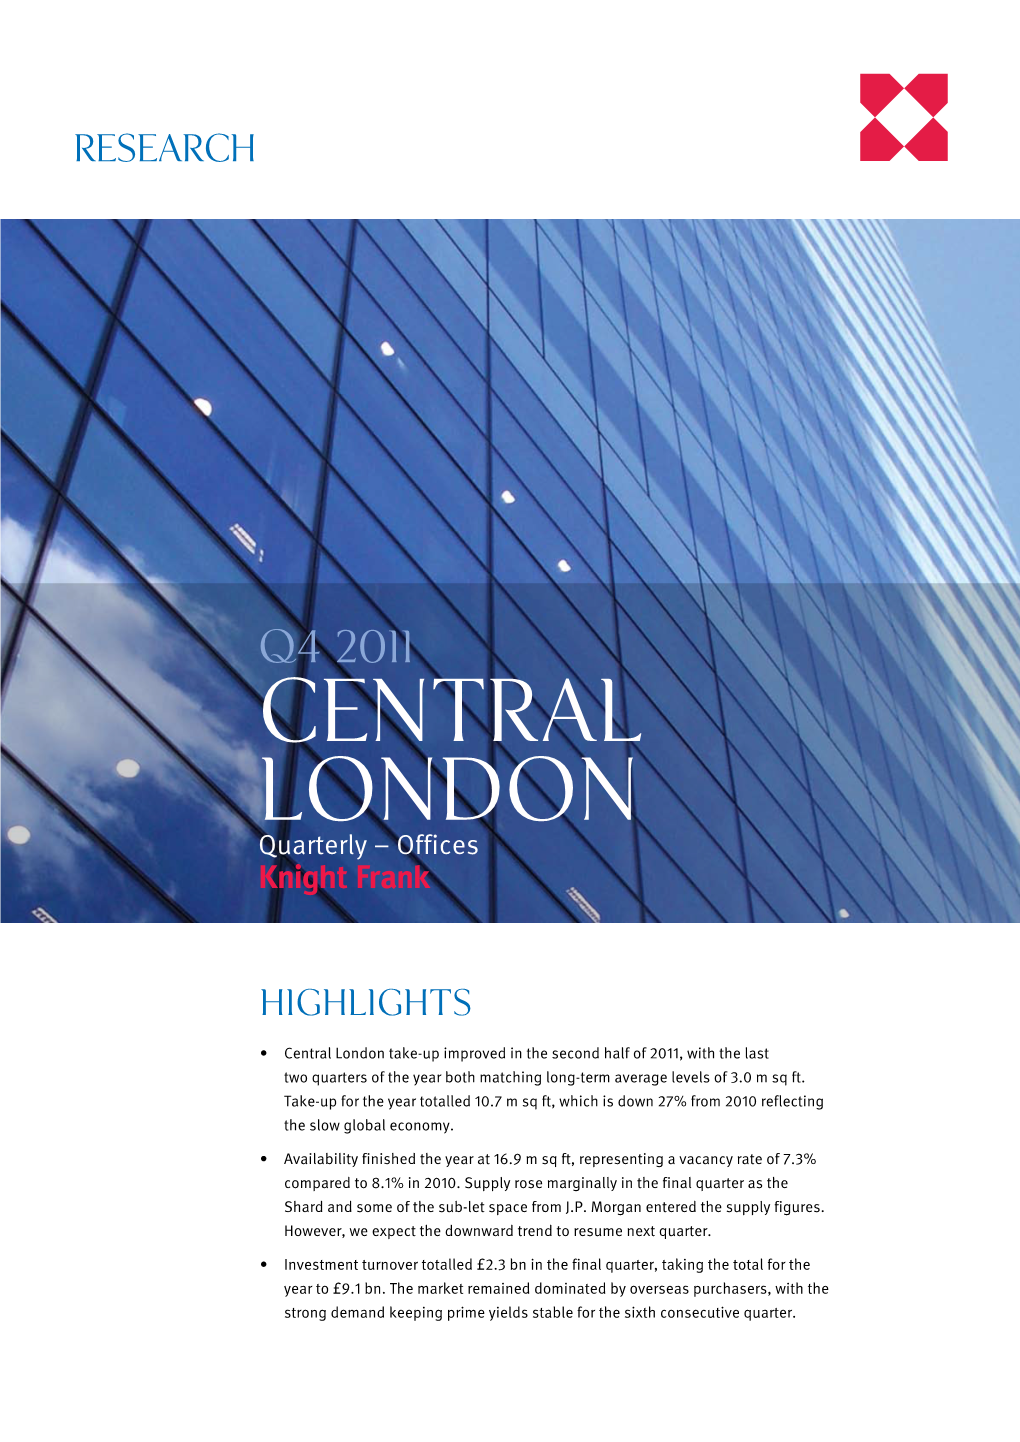 CENTRAL LONDON Quarterly – Offices